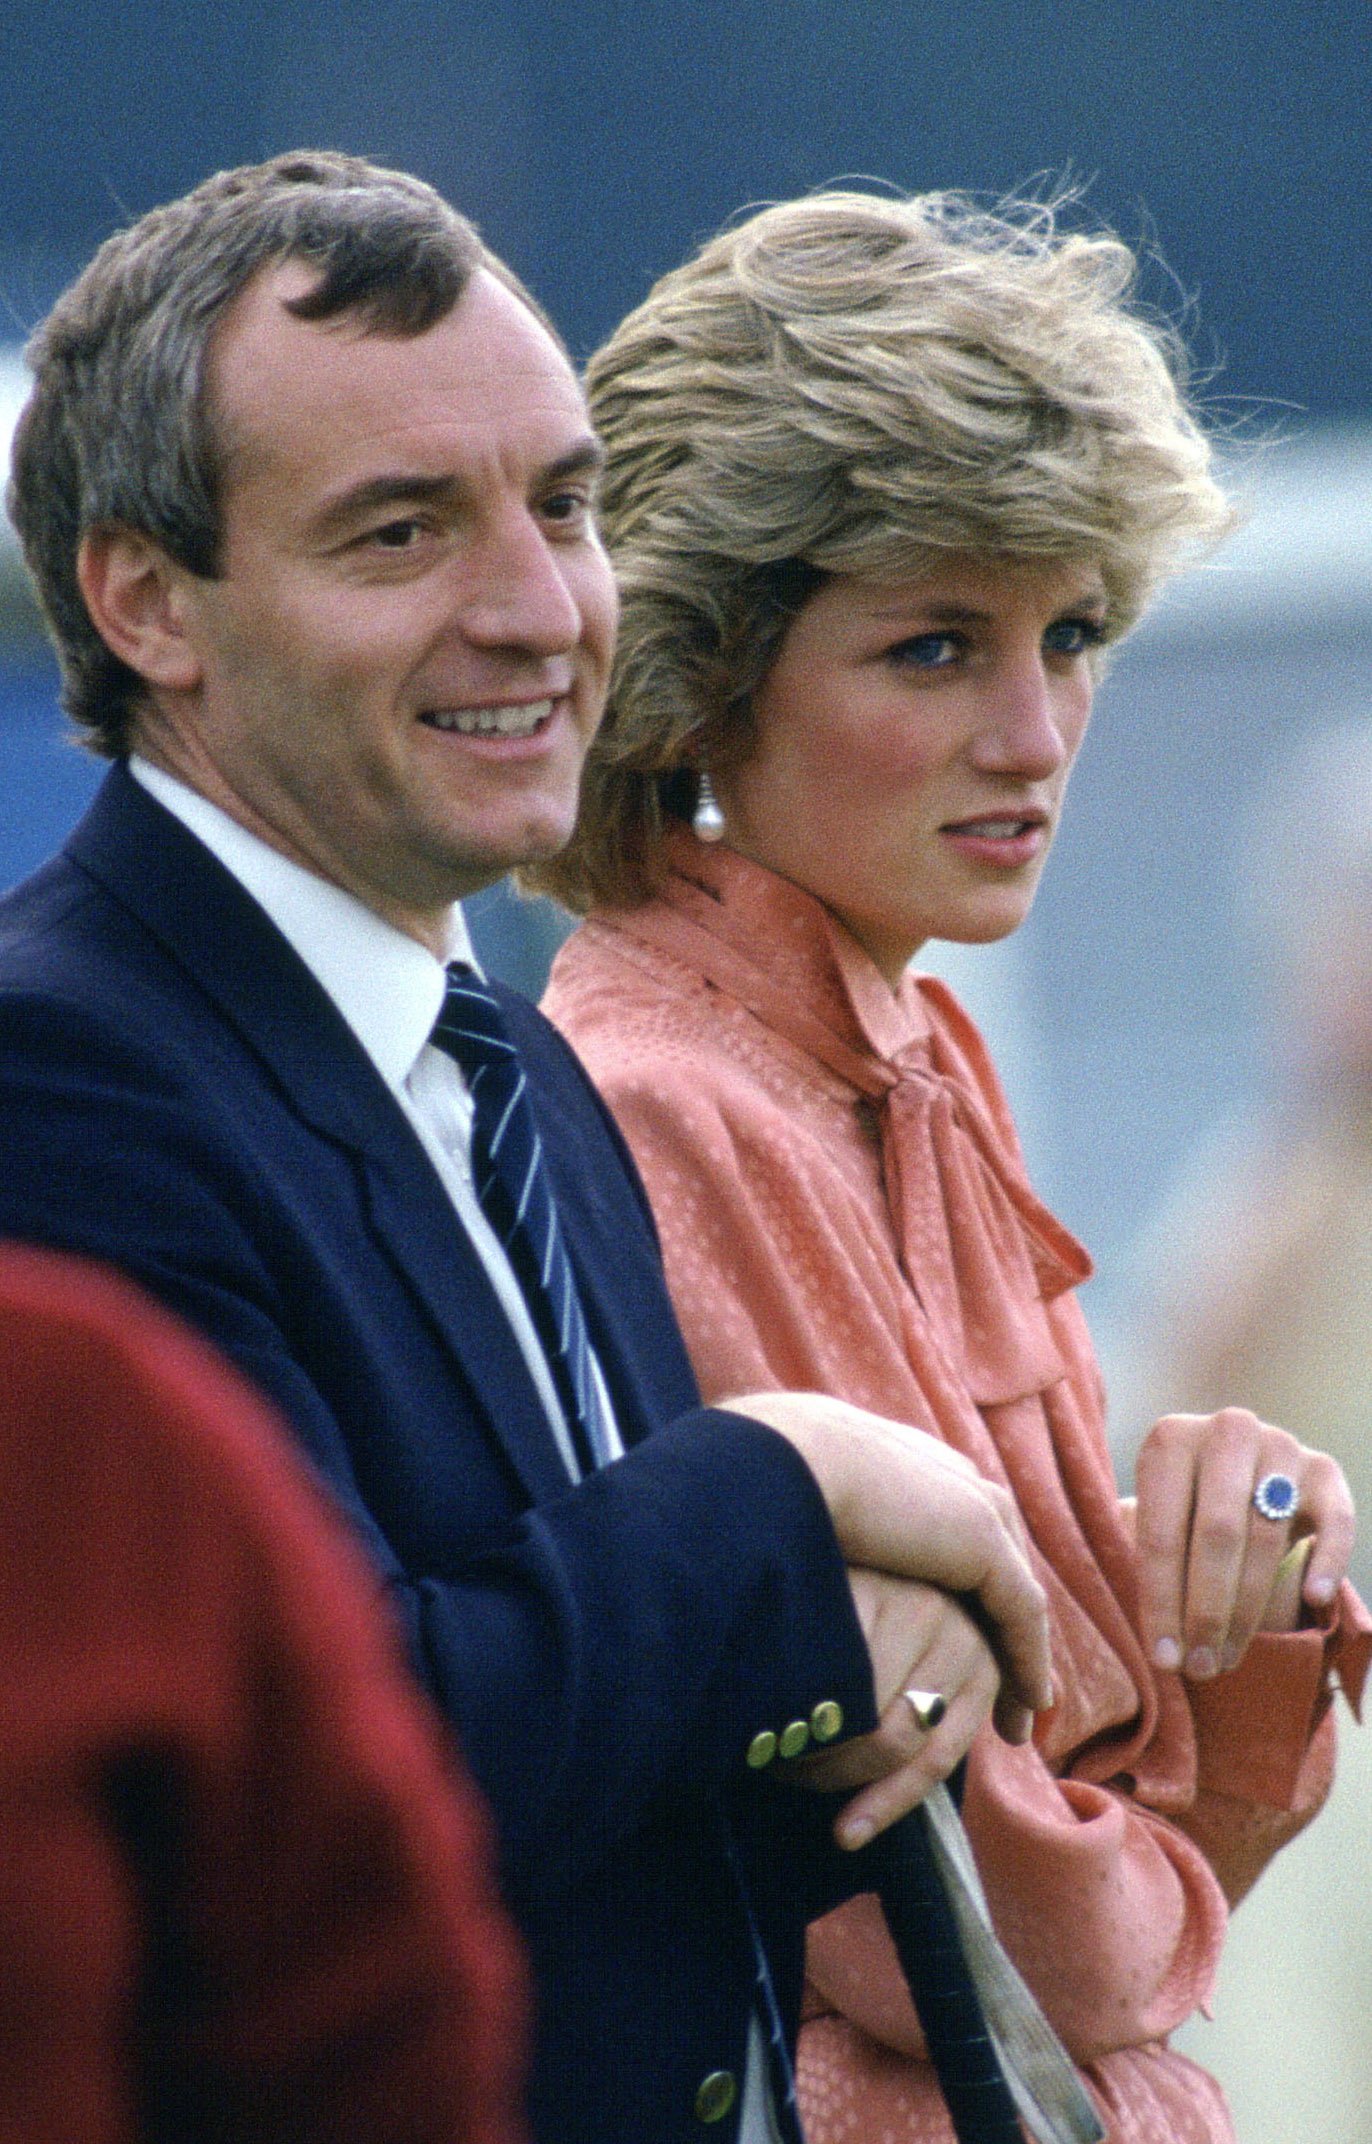  Diana, Princess Of Wales, with her police bodyguard, Barry Mannakee, while watching a match at Guards Polo Club, Smiths Lawn, Windsor. | Source: Getty Images